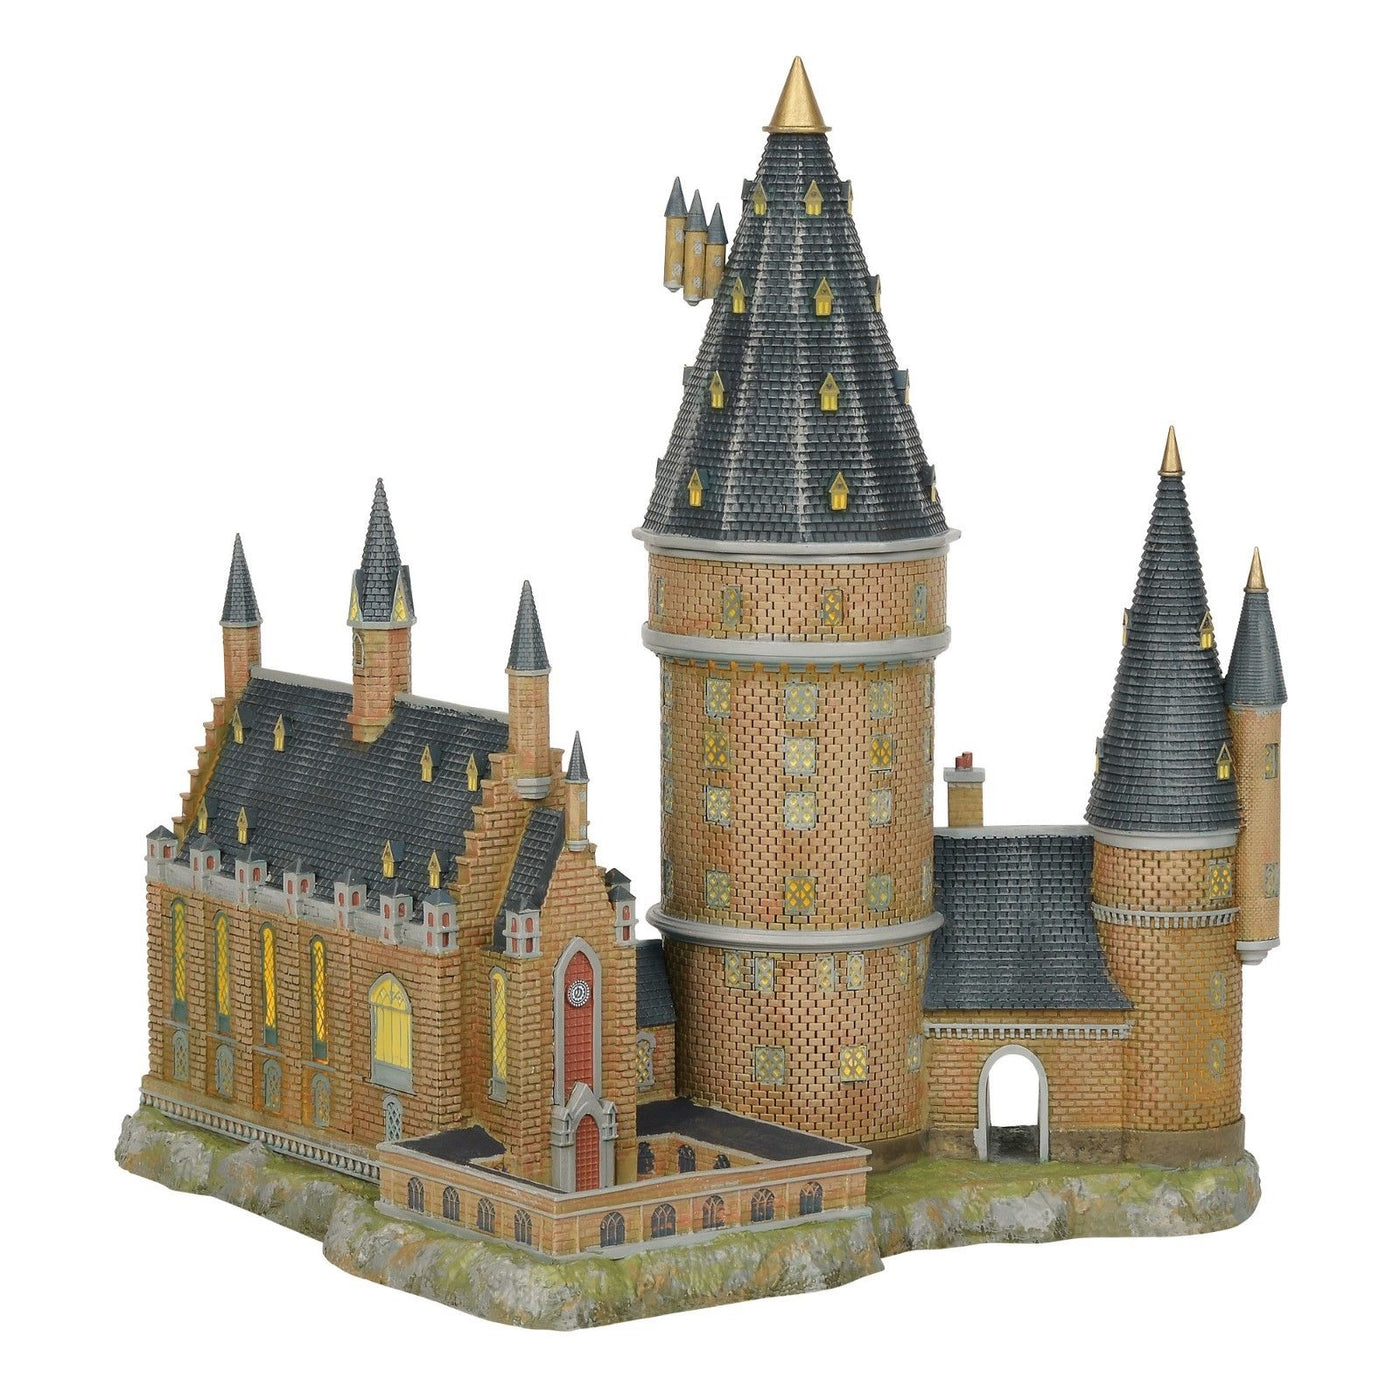 Department 56 Harry Potter Village Hogwarts Great Hall Figurine New with Box